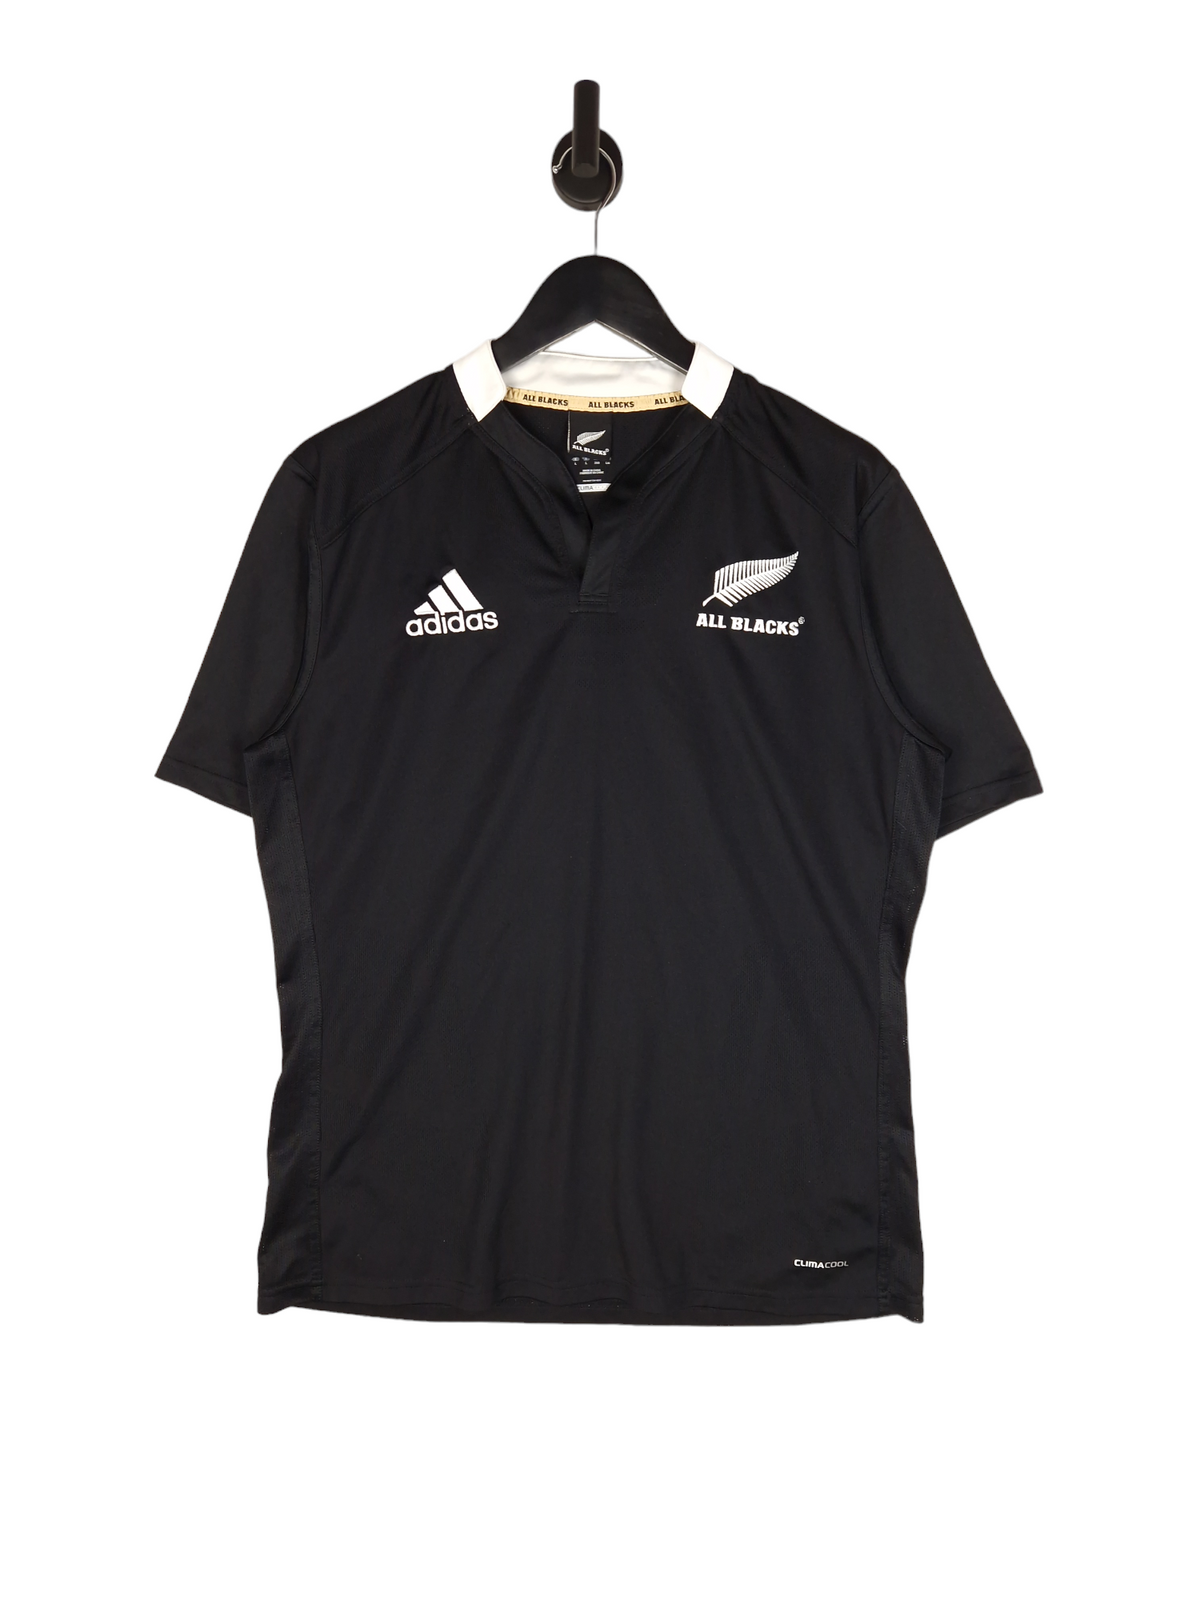 Adidas 2012/13 New Zealand Rugby Union Jersey - Size Large